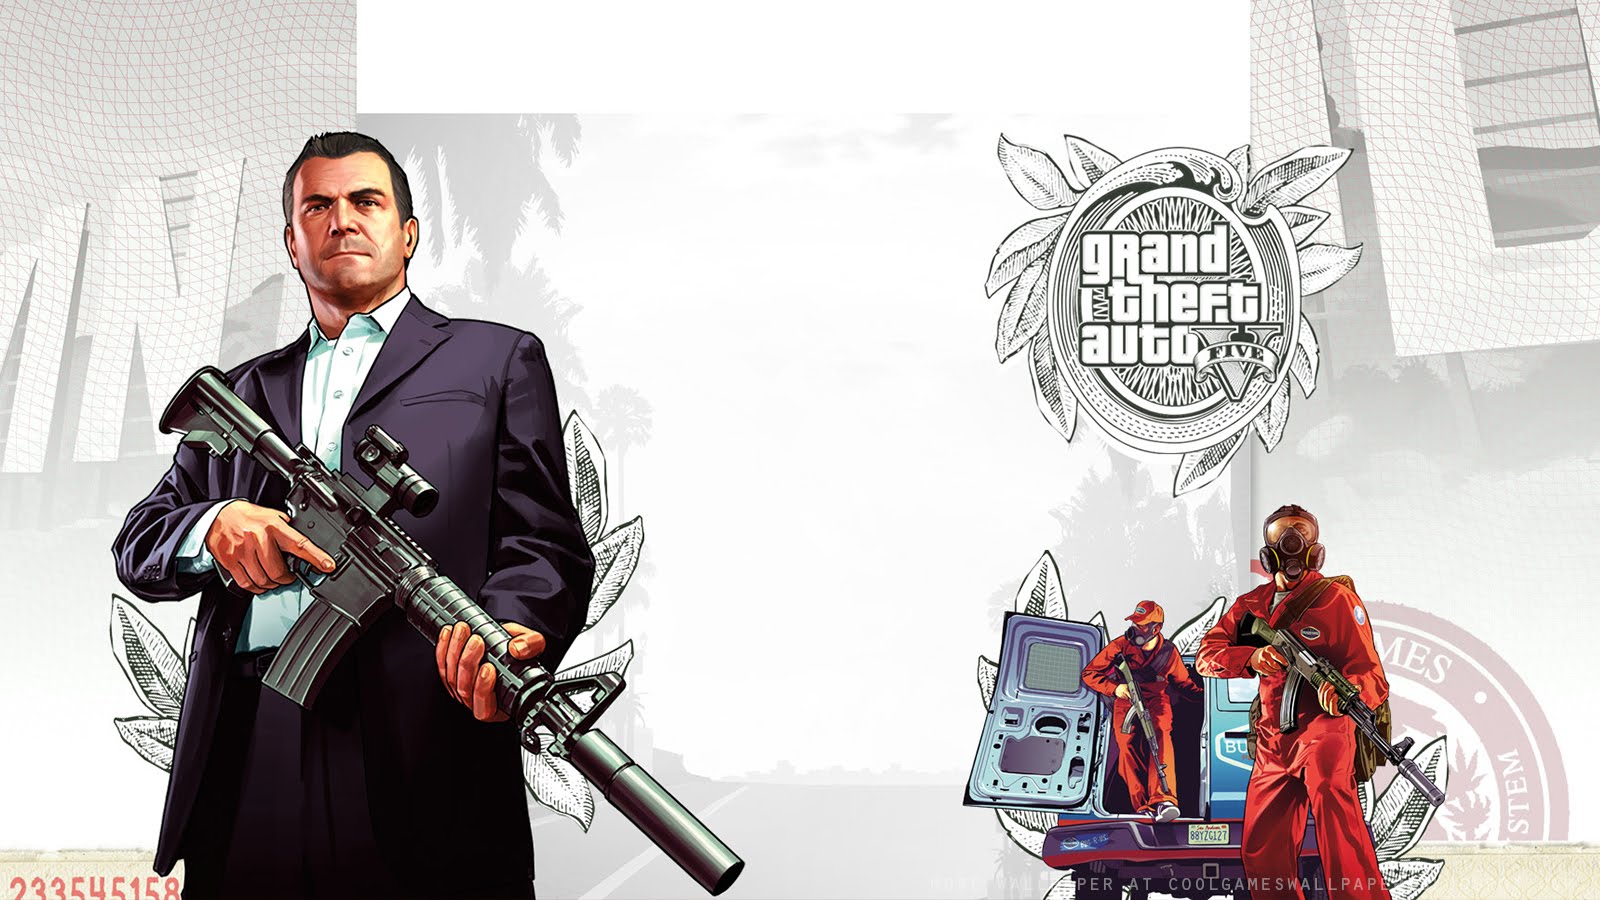 GTA 4 Grand Theft Auto PC Game Full Version Free Download | Free-Zone